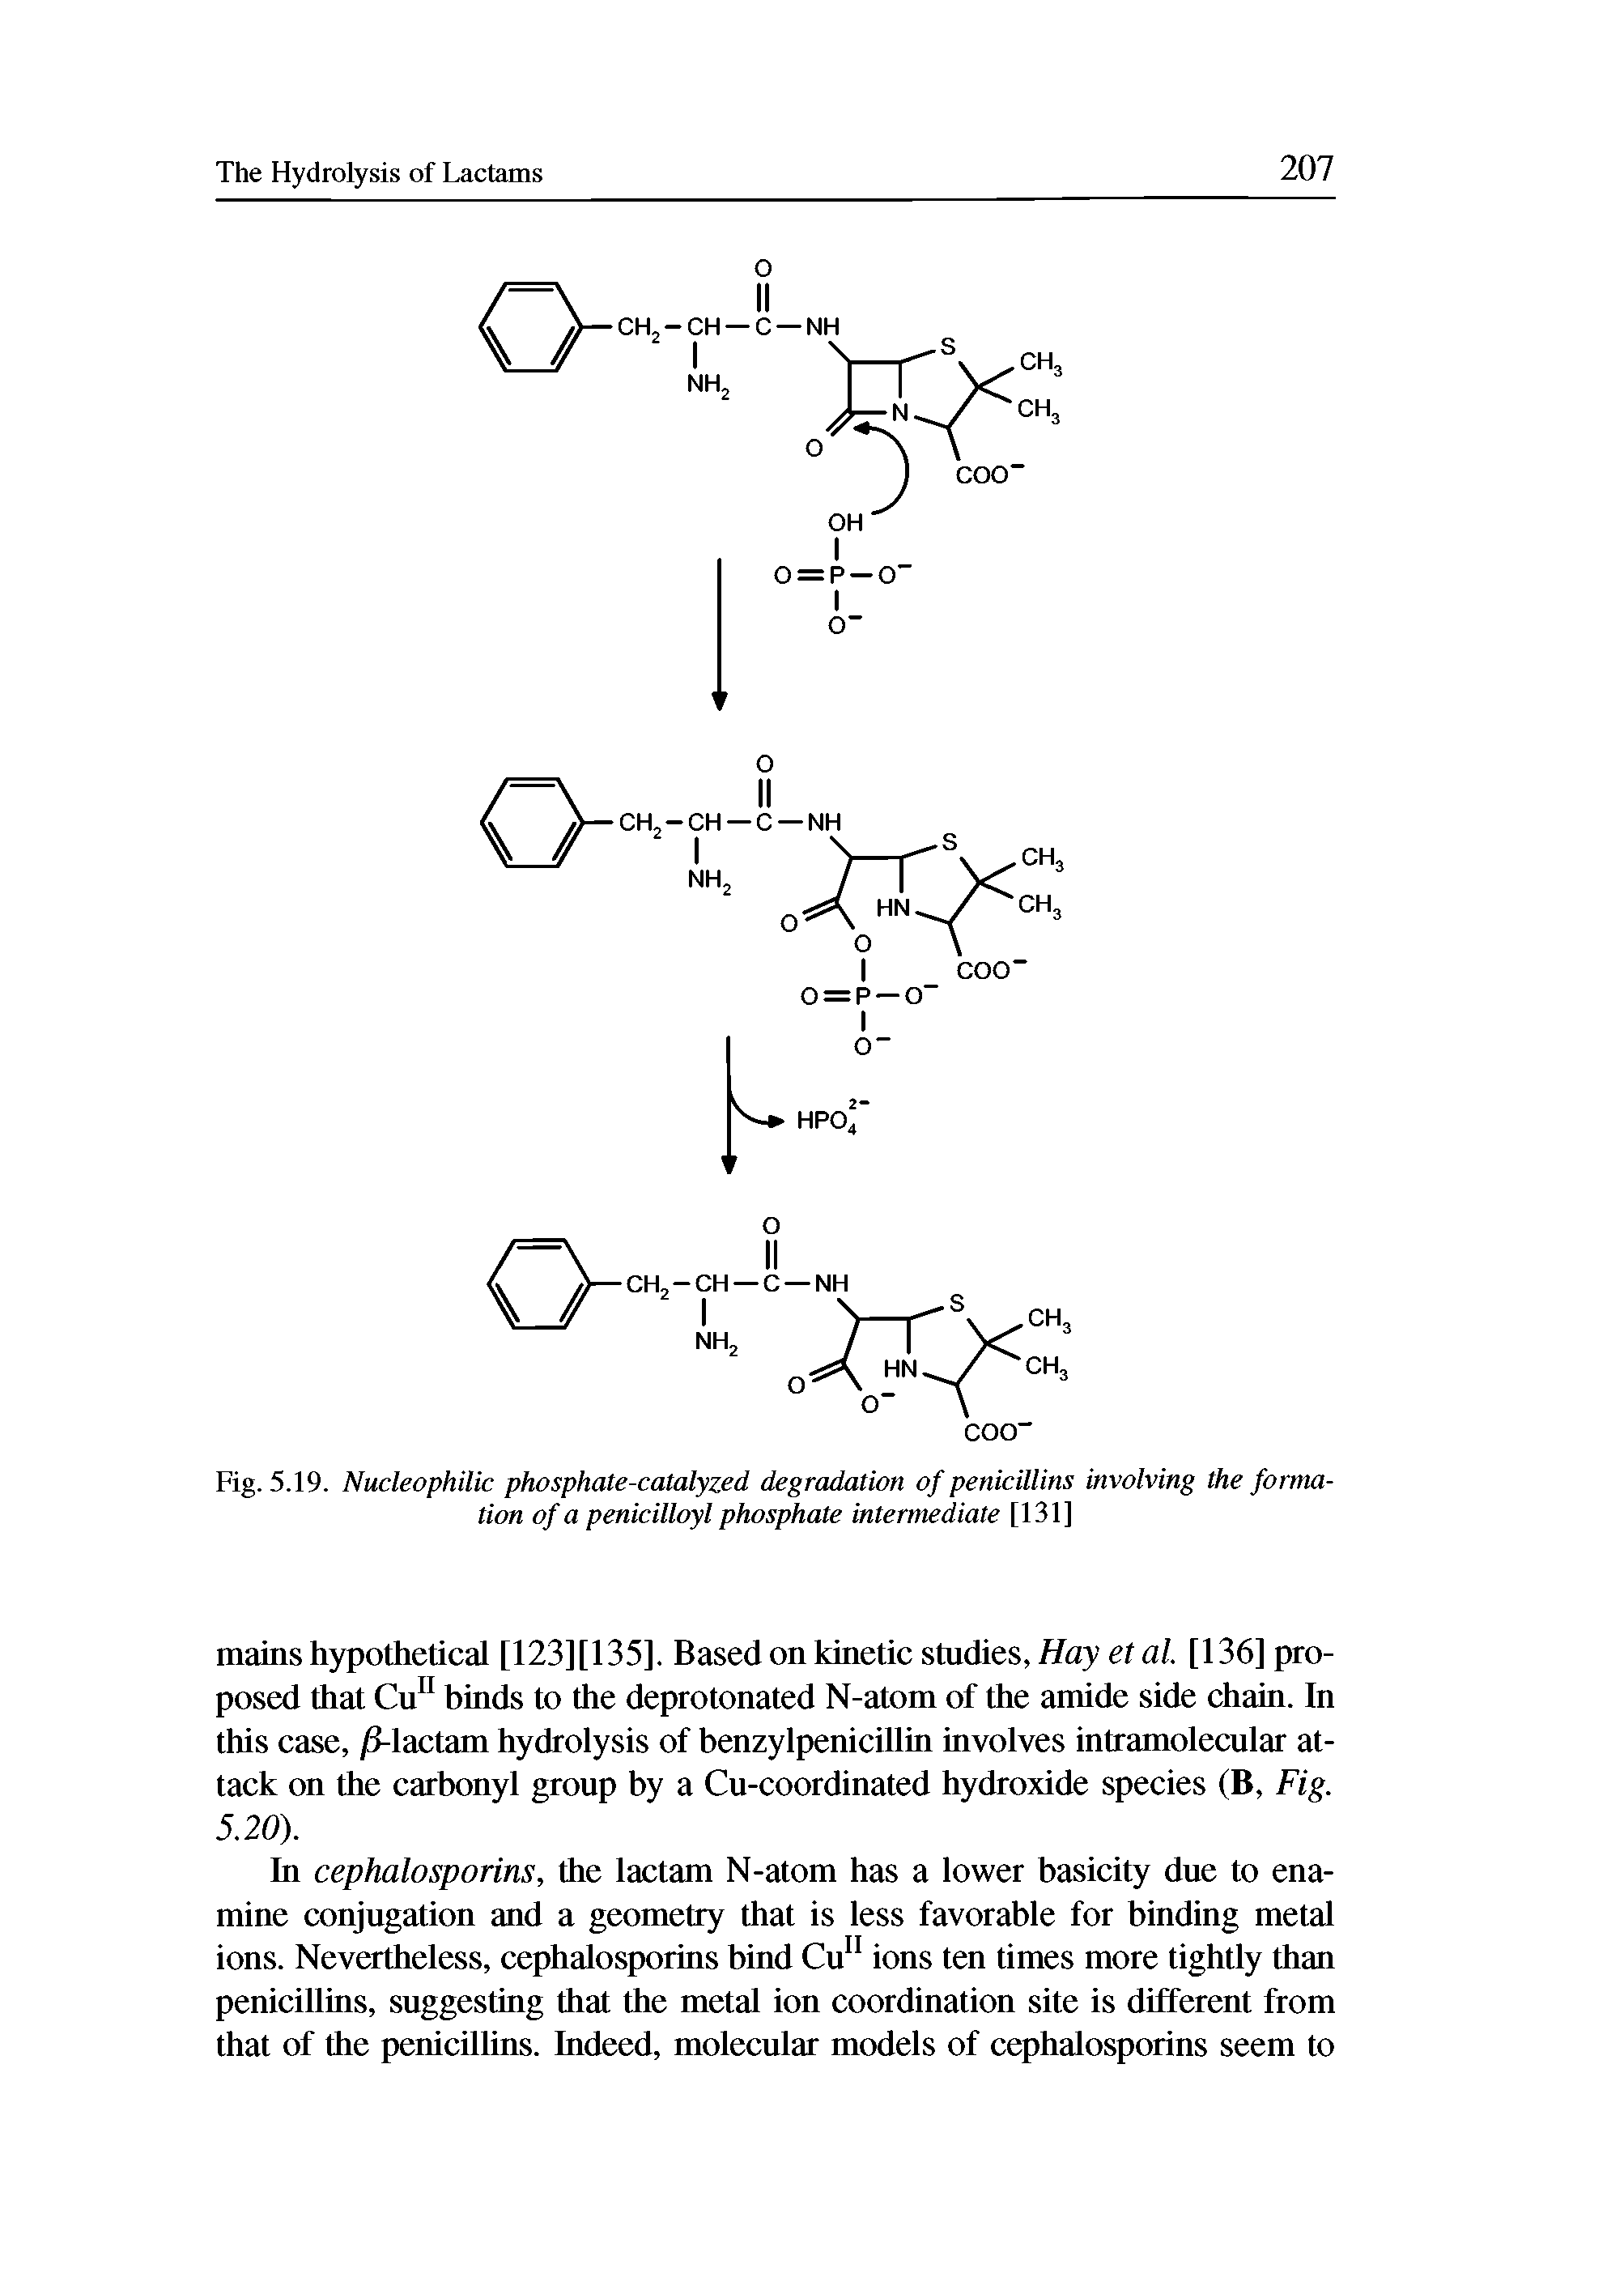 Fig. 5.19. Nucleophilic phosphate-catalyzed degradation of penicillins involving the formation of a penicilloyl phosphate intermediate [131]...